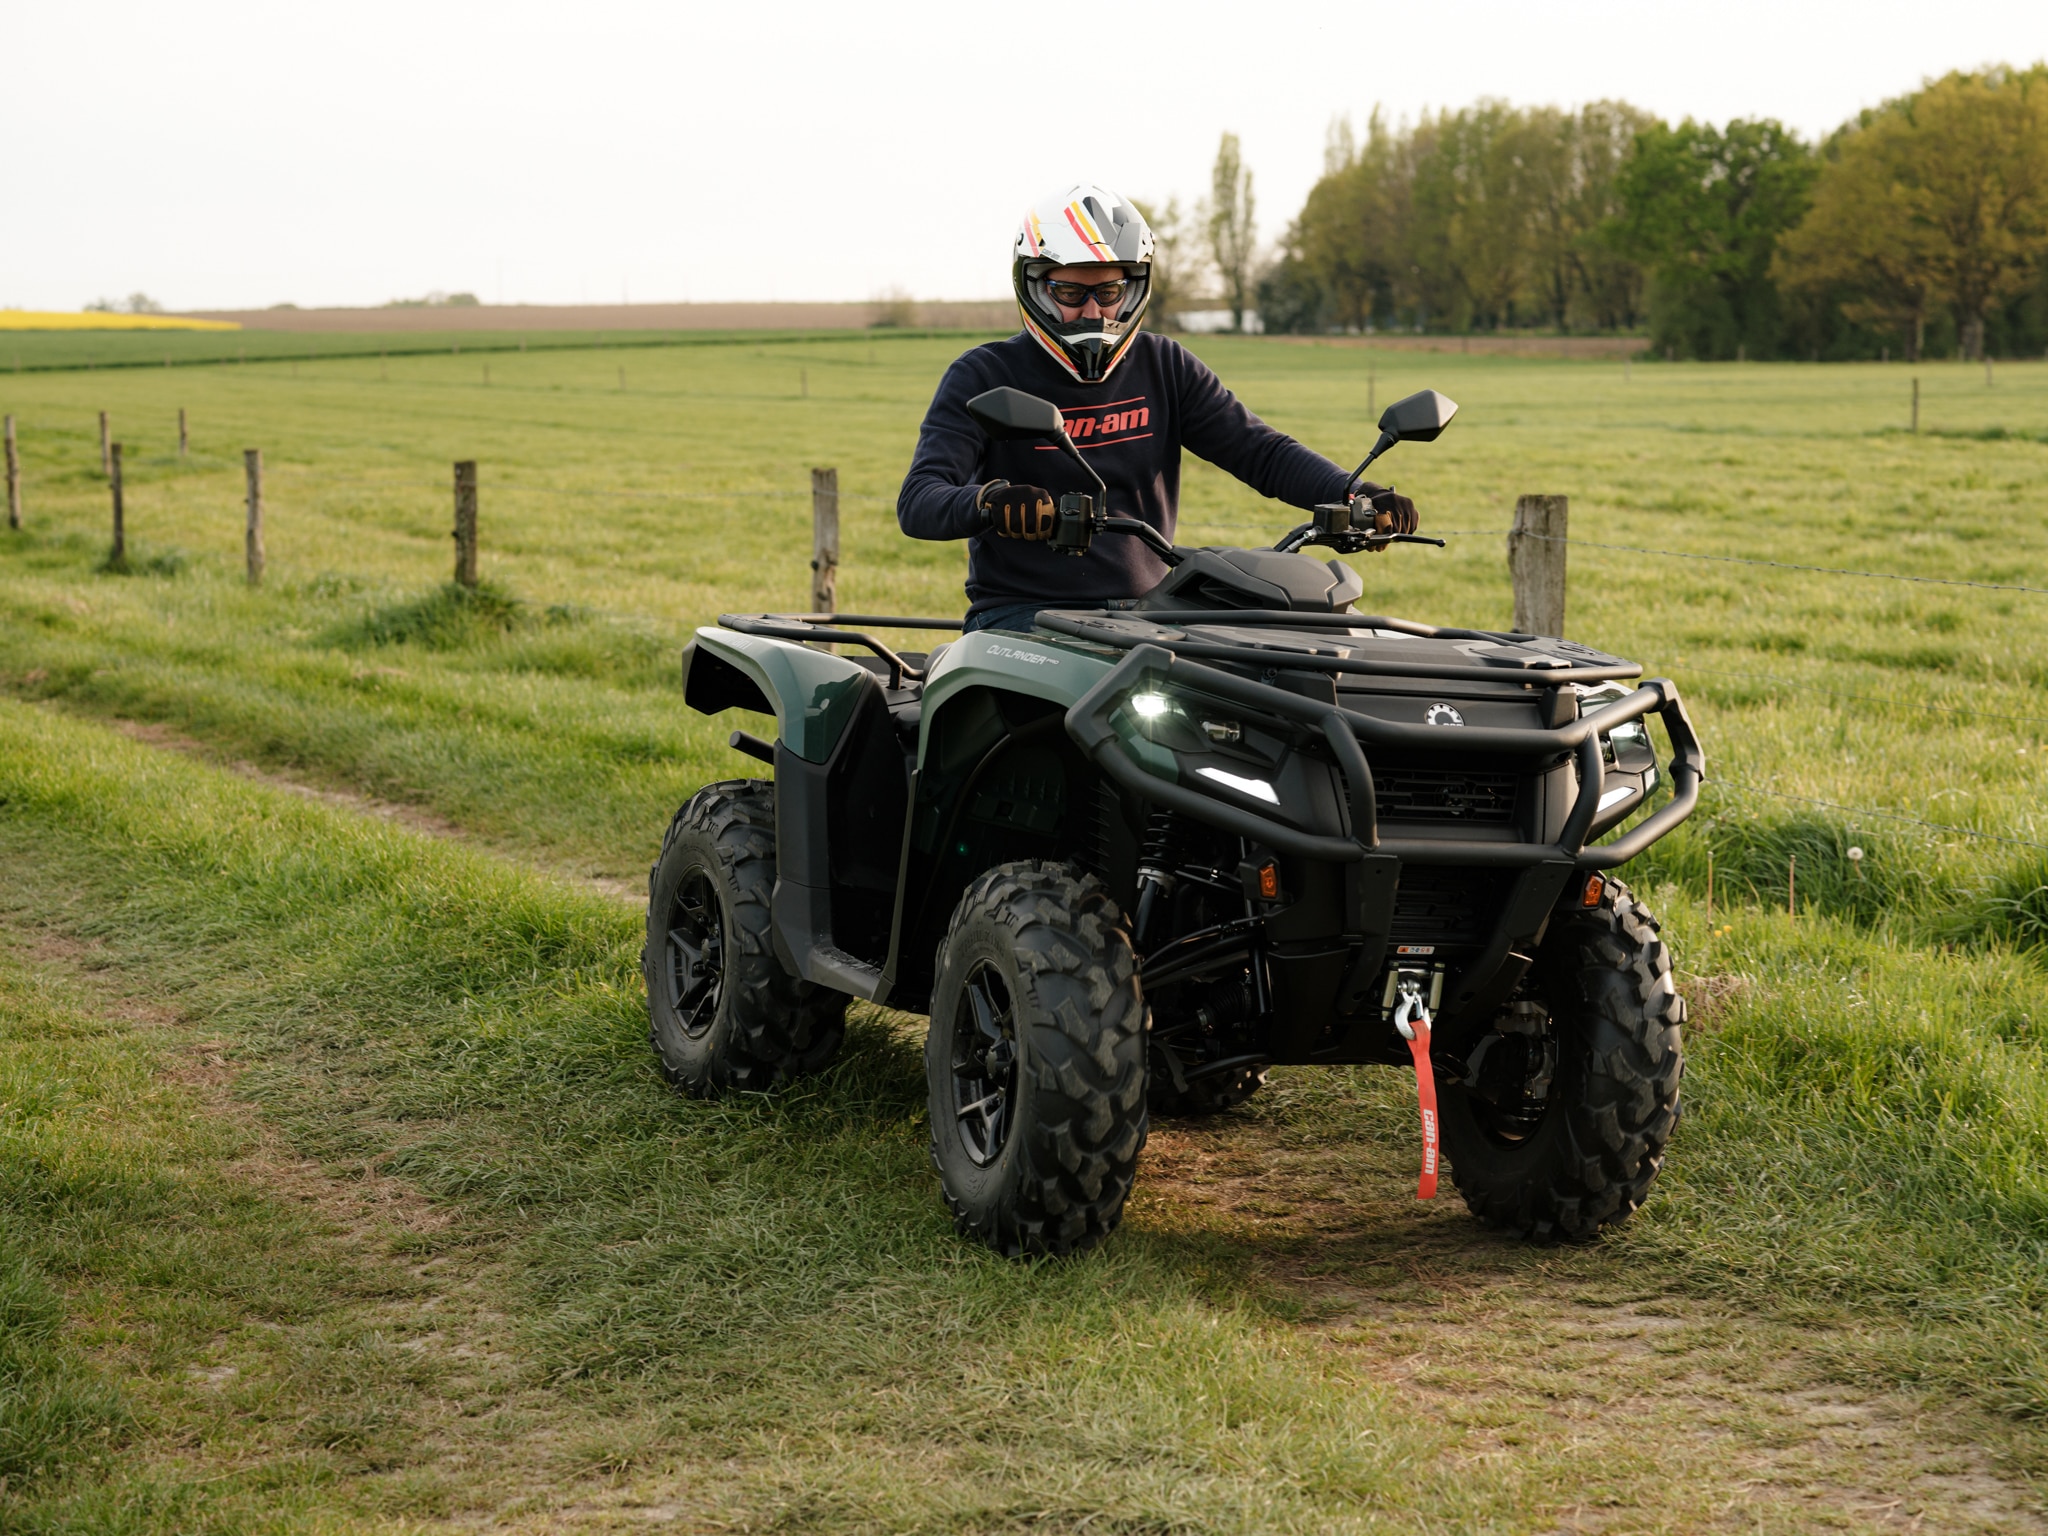 Rider driving Can Am ATV in a field trail